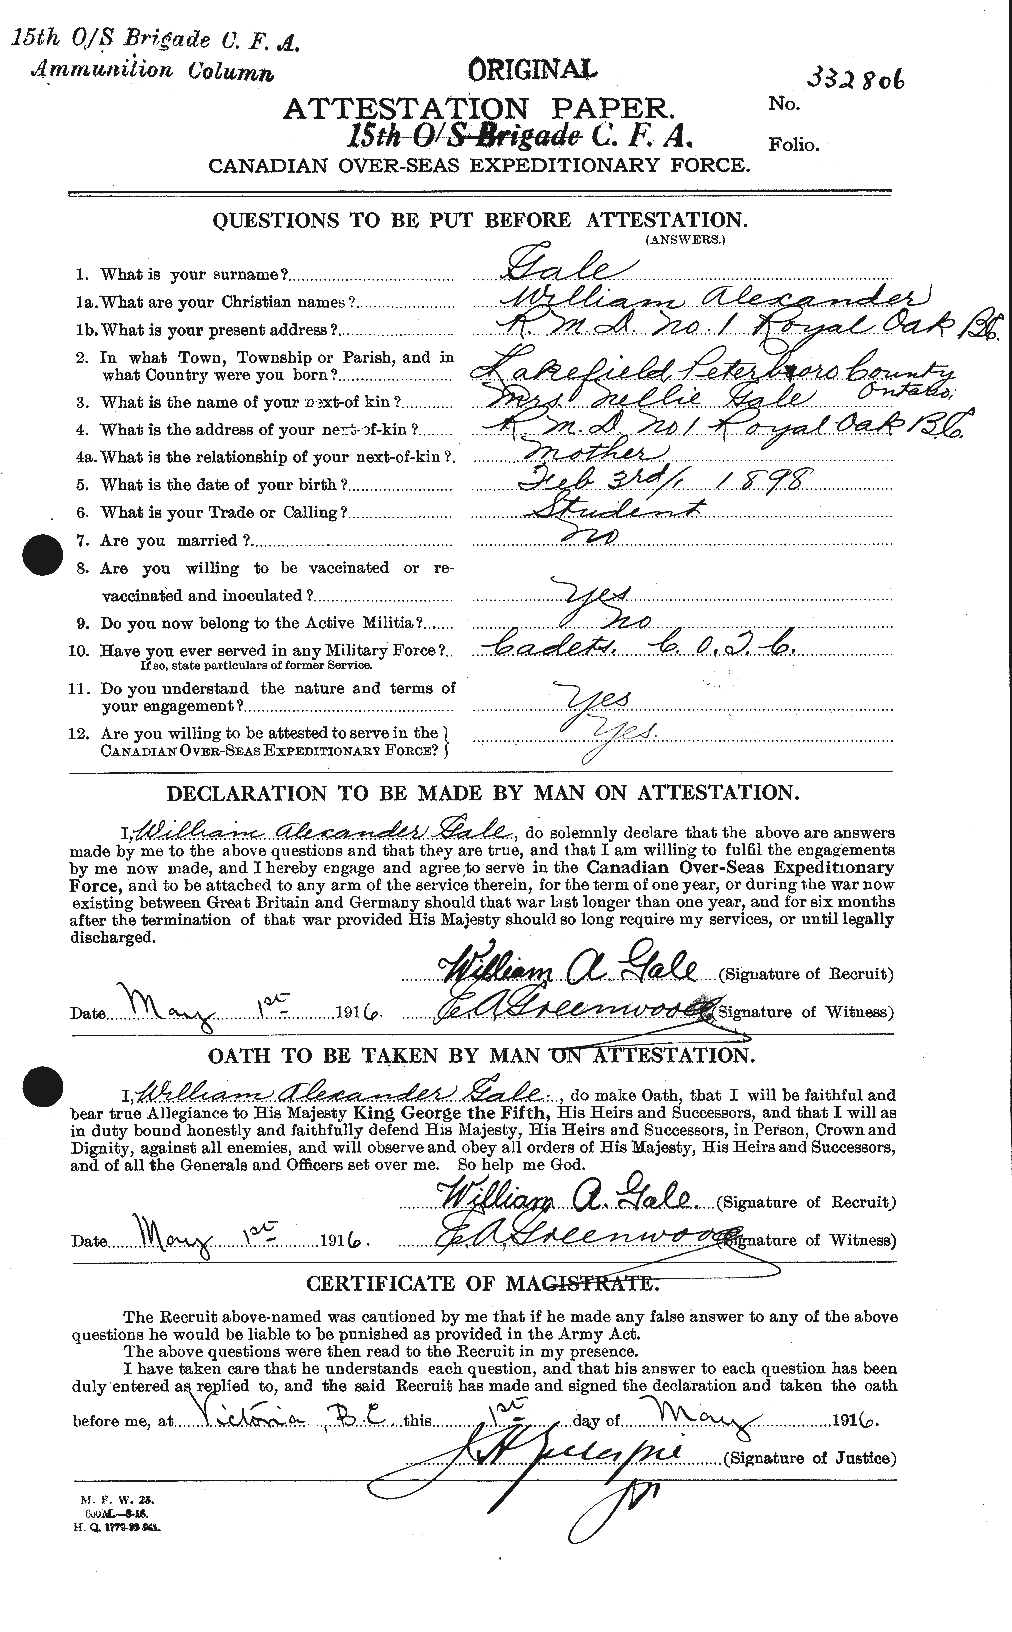 Personnel Records of the First World War - CEF 345433a